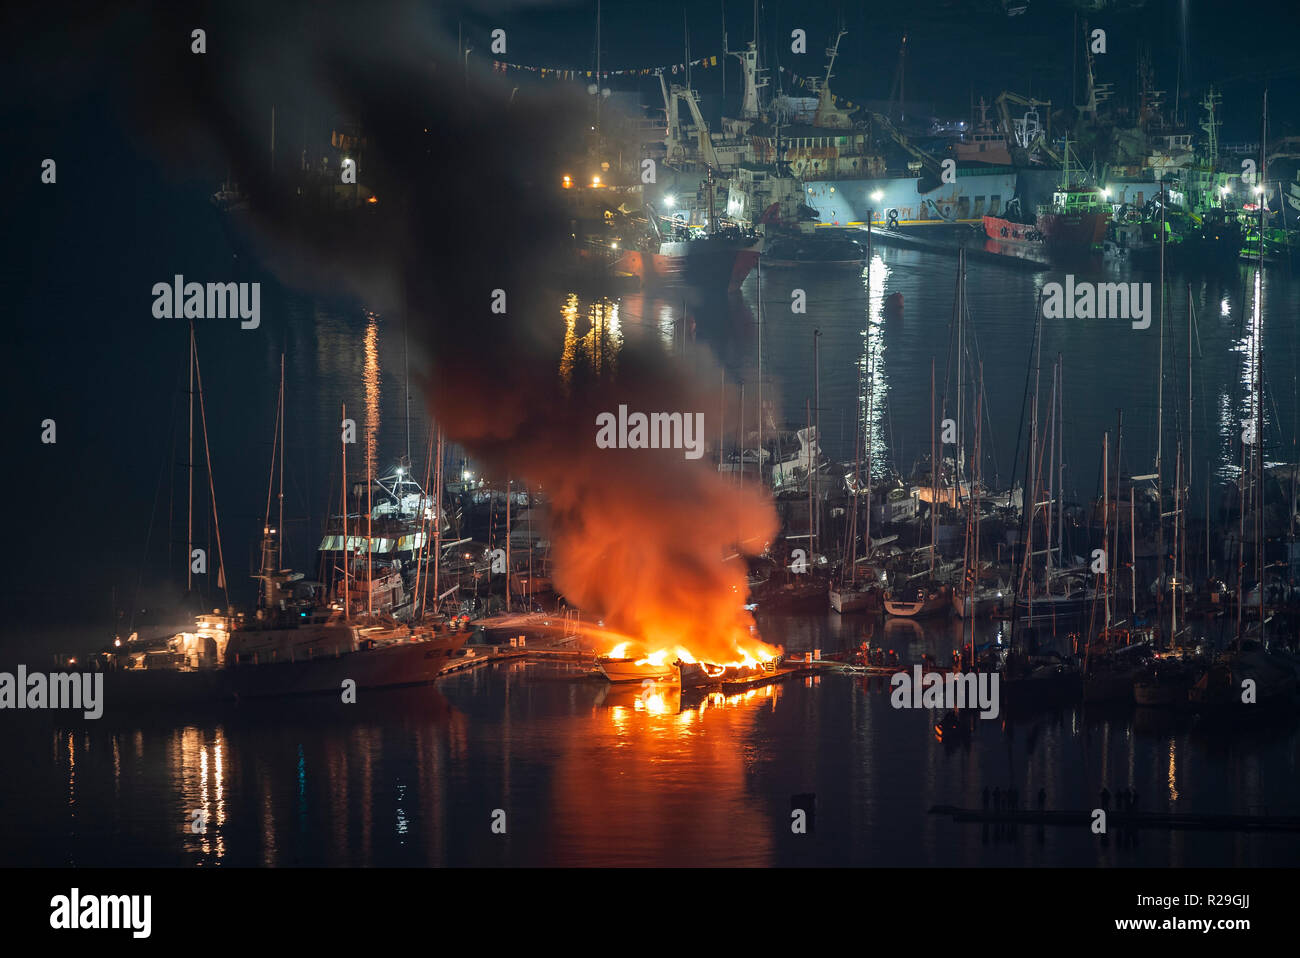 During the night, firefighters try to put out two luxury yachts that are catching fire at the marina berth Stock Photo